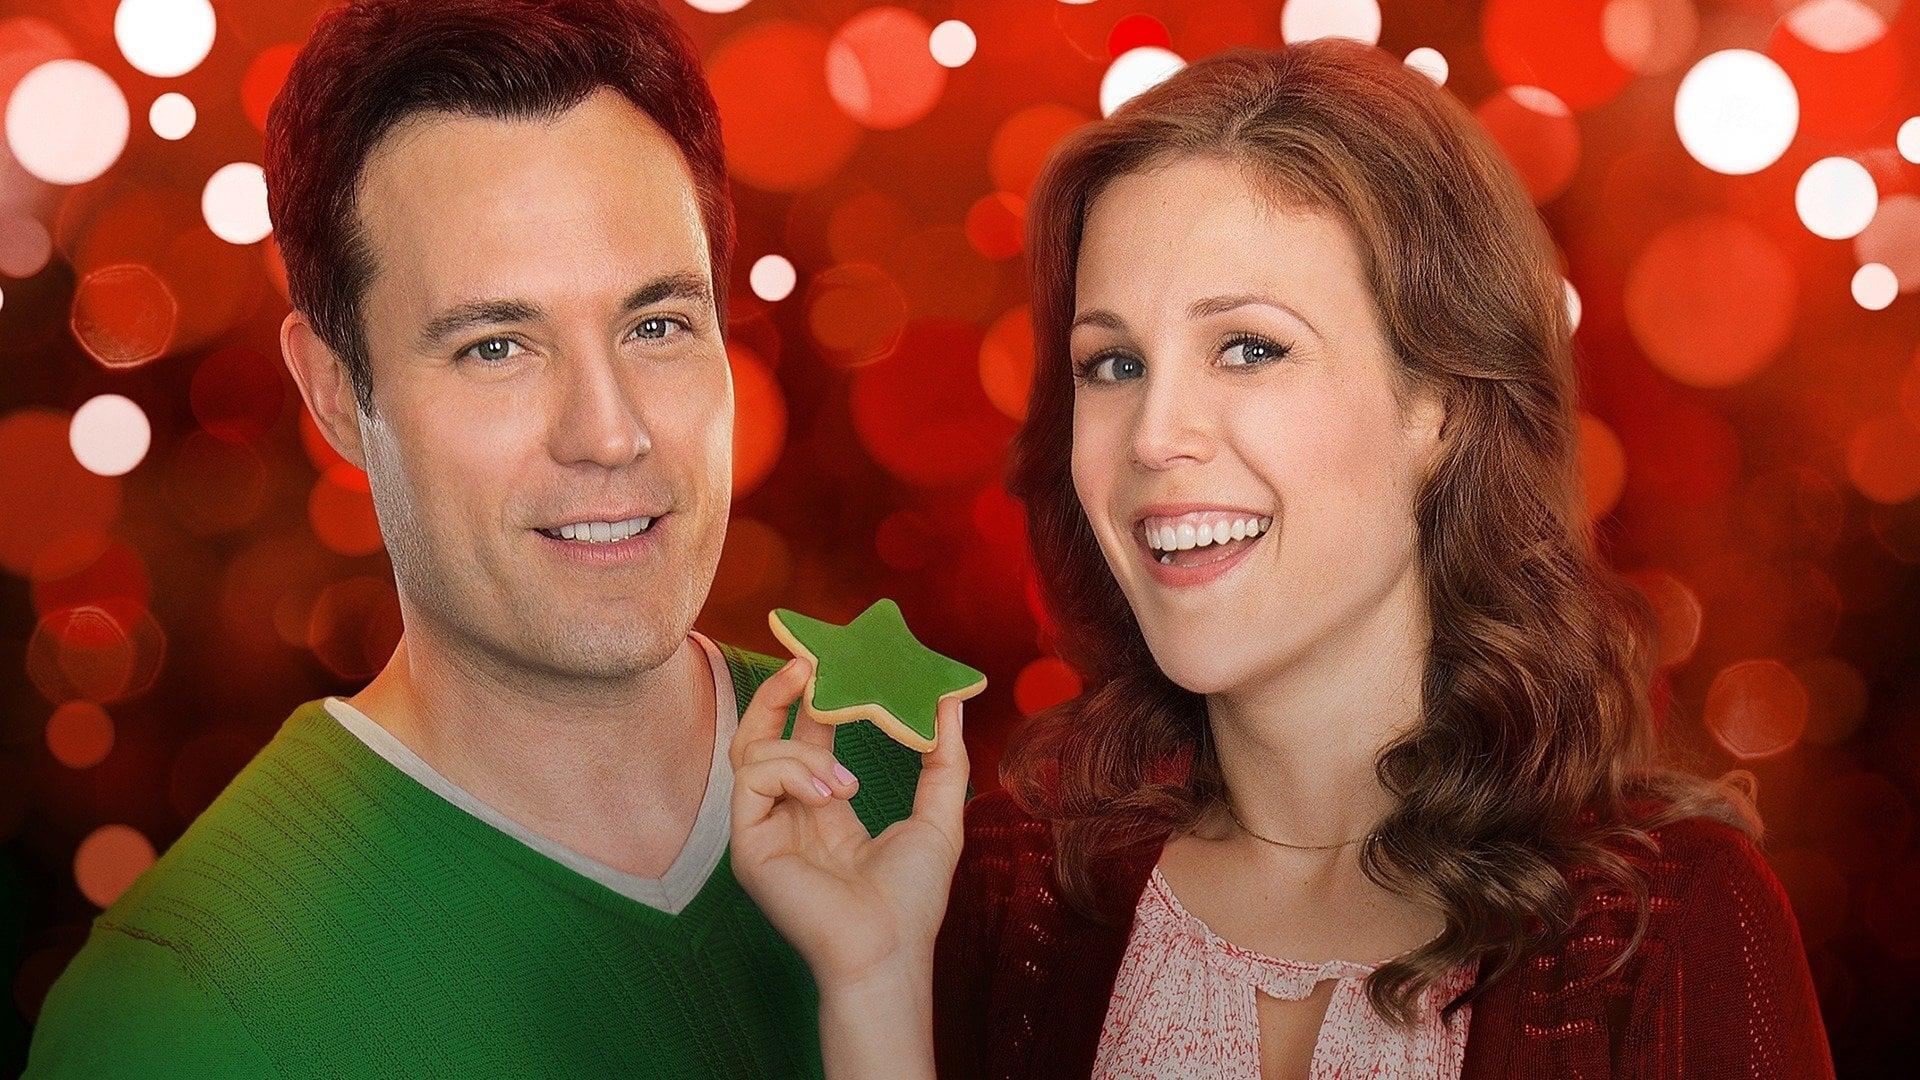 A Cookie Cutter Christmas backdrop